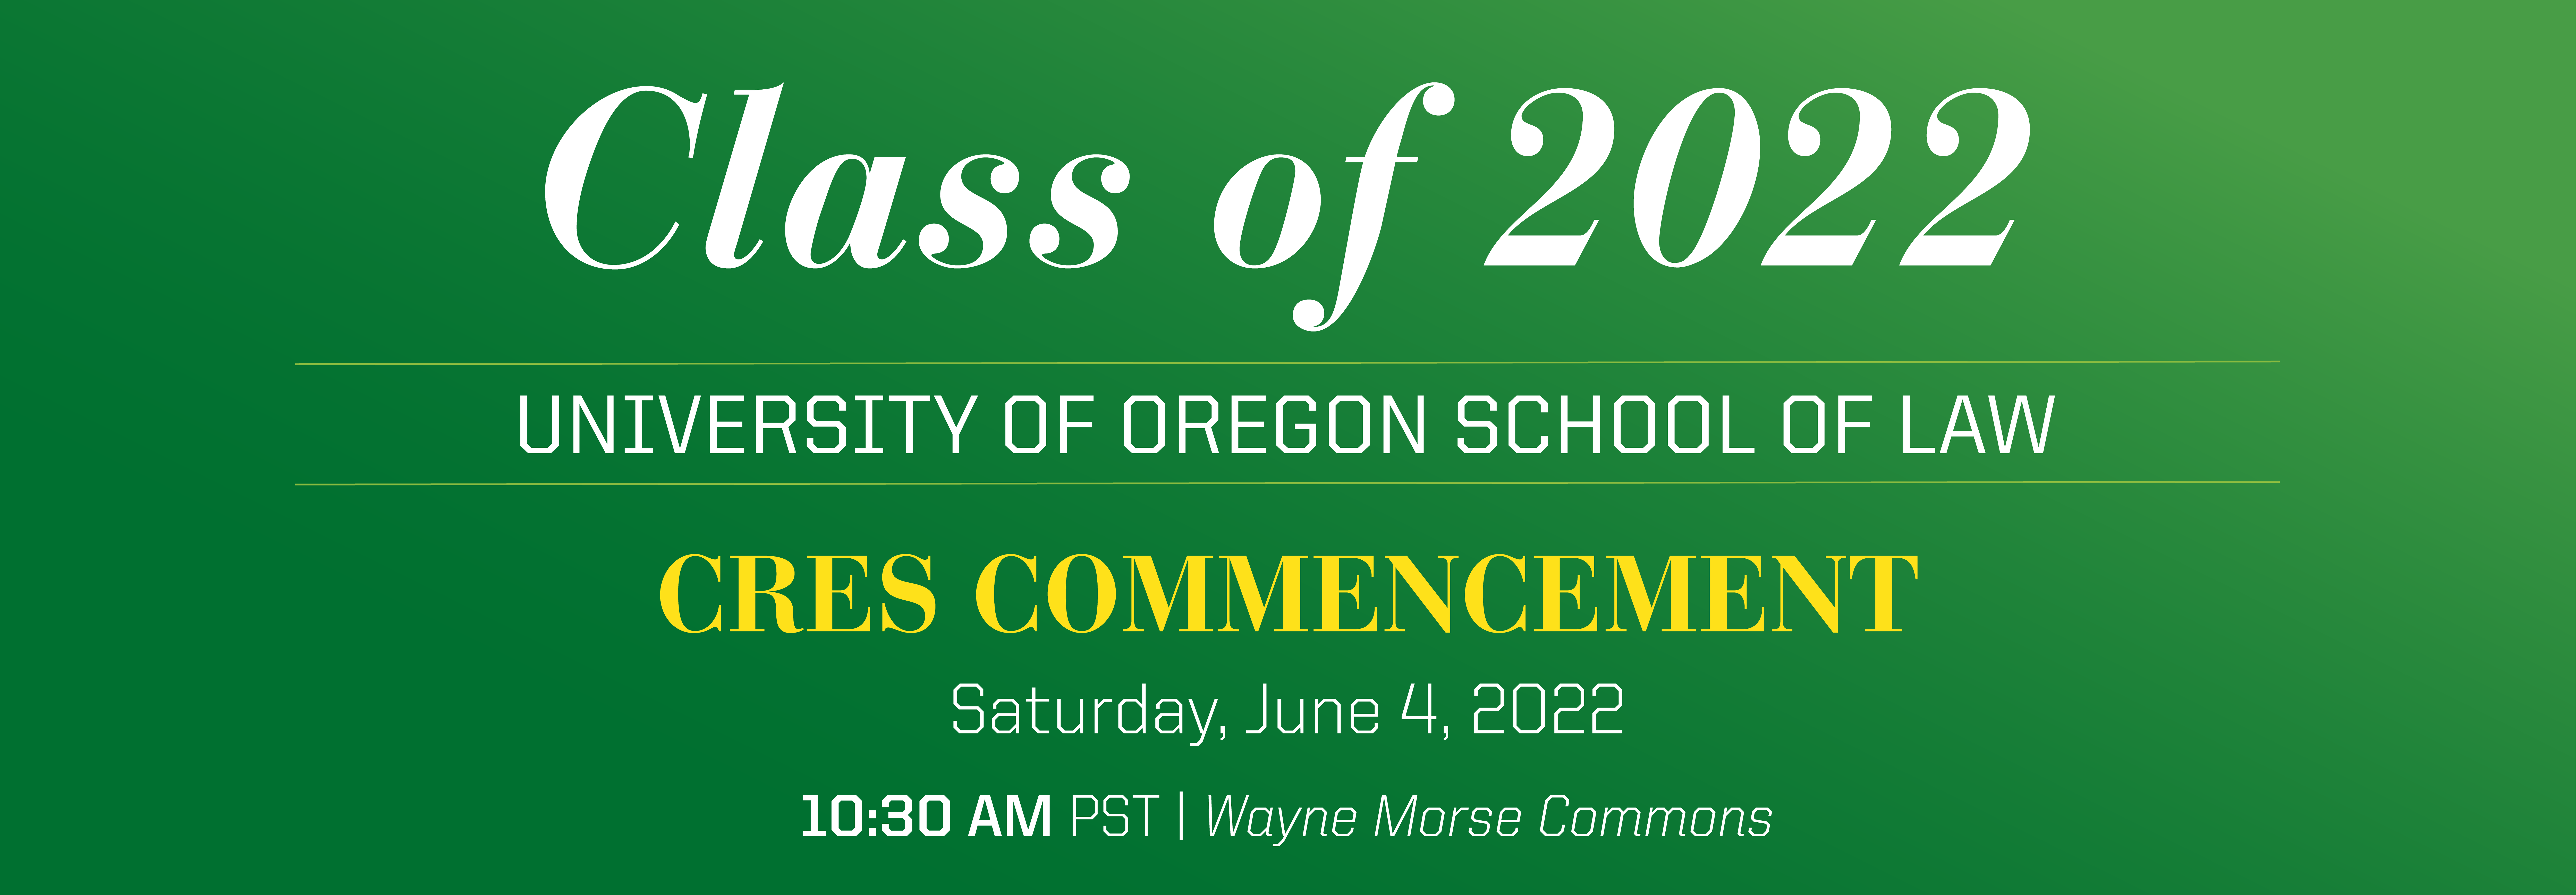 CRES commencement June 4, 2022 at 10:30 am